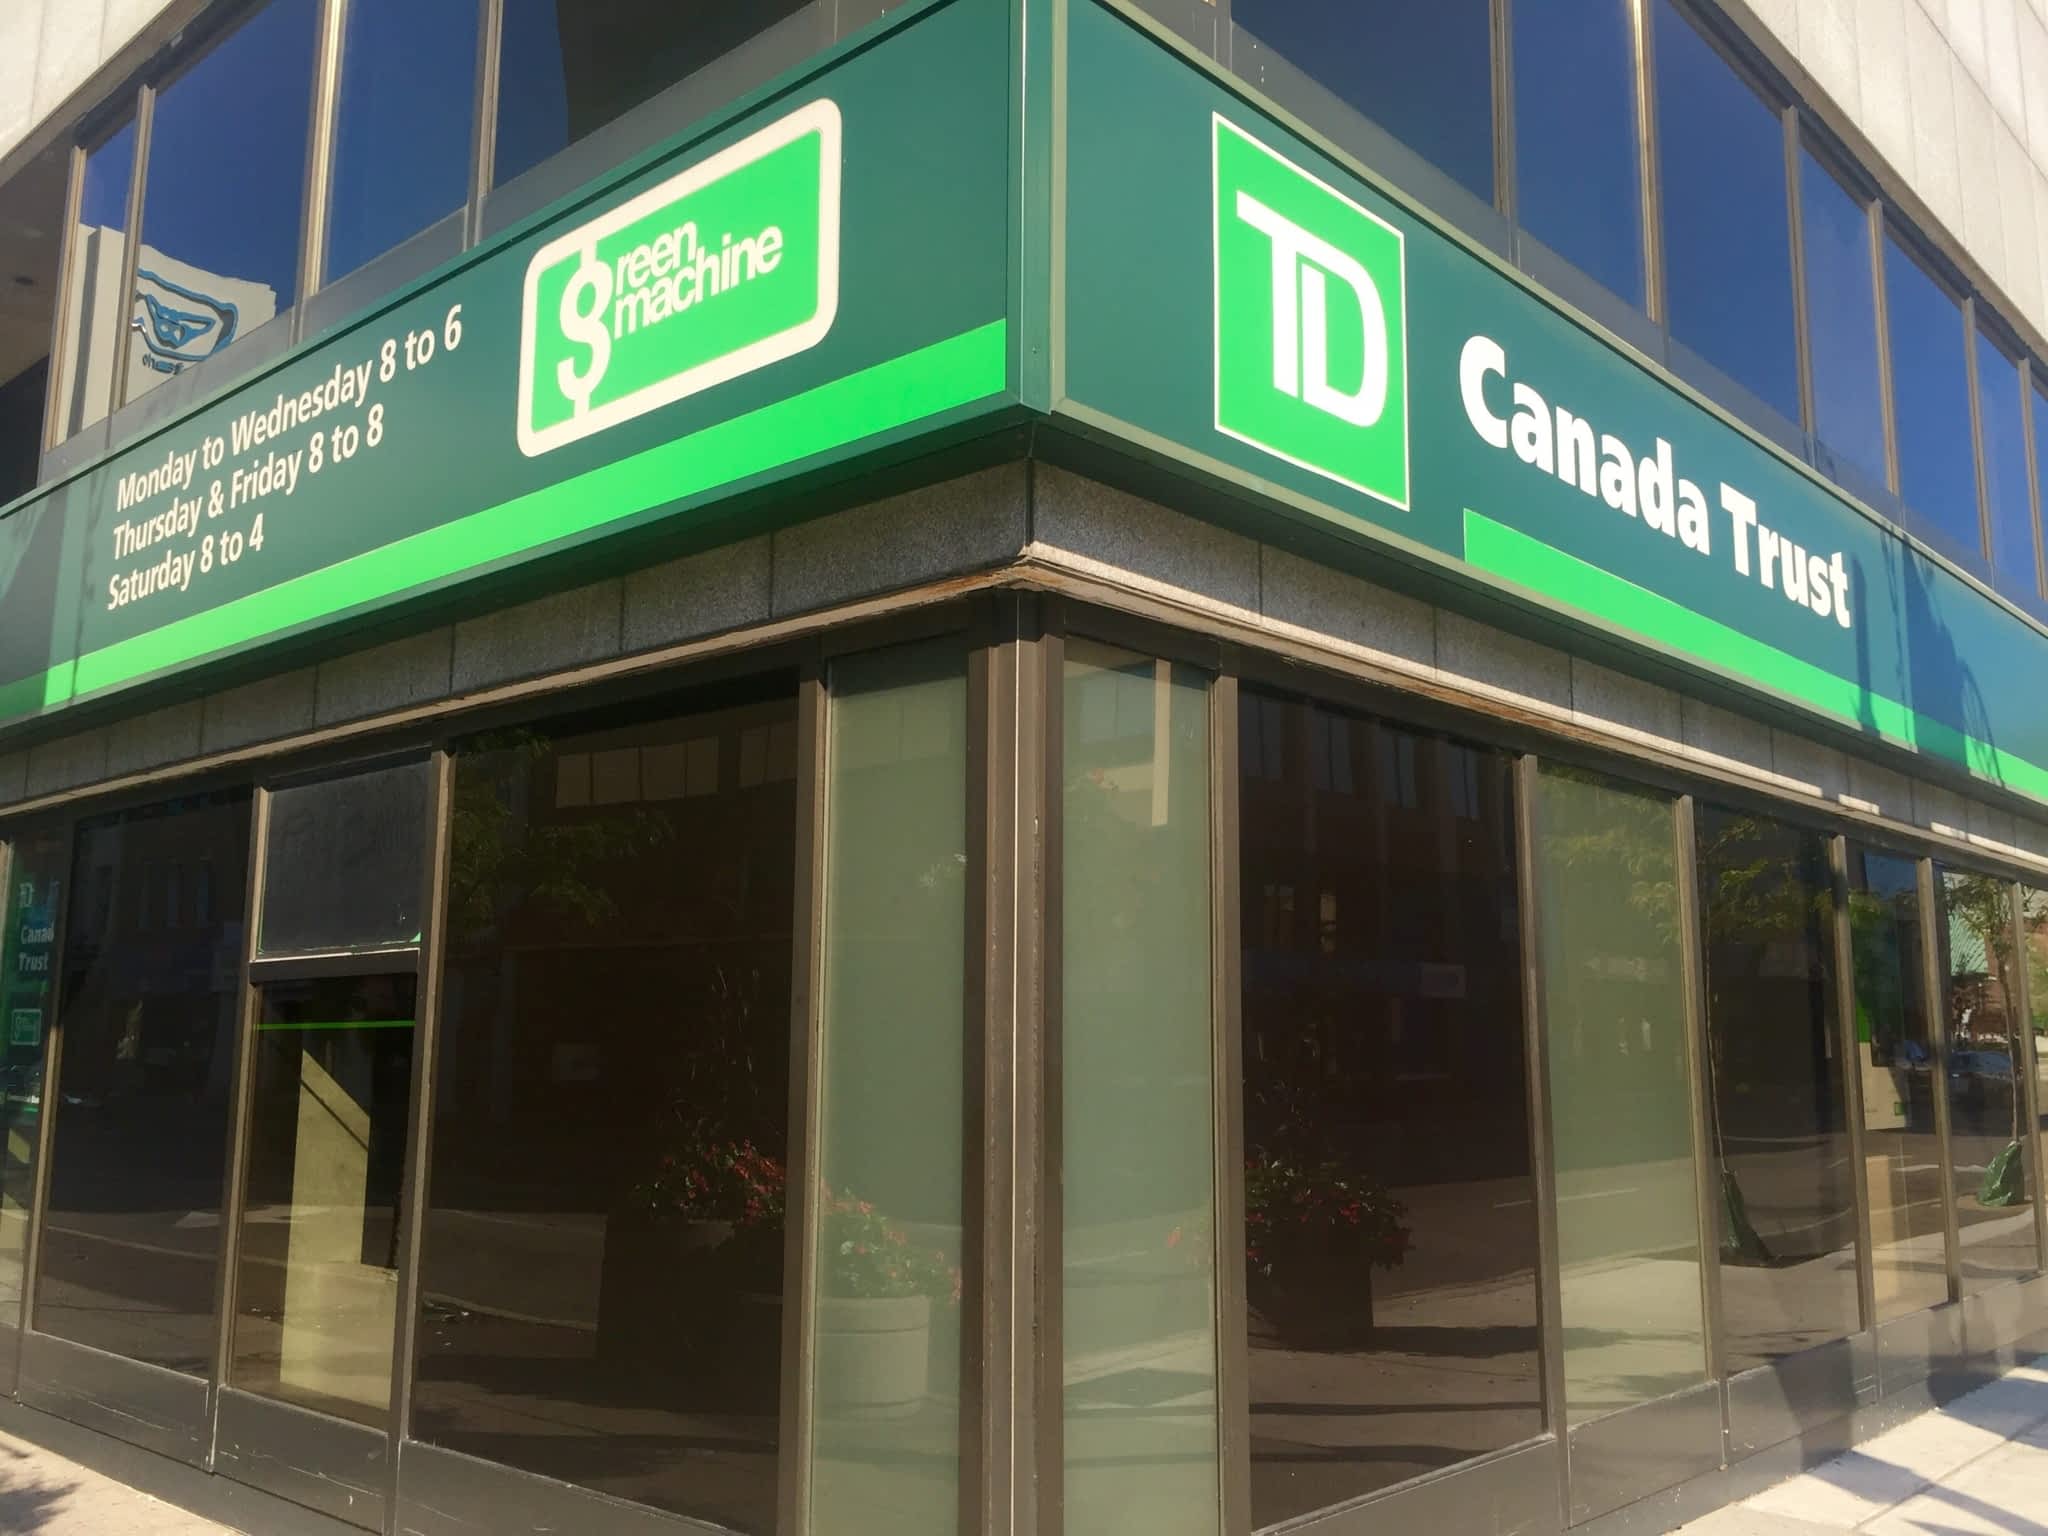 photo TD Canada Trust Branch and ATM